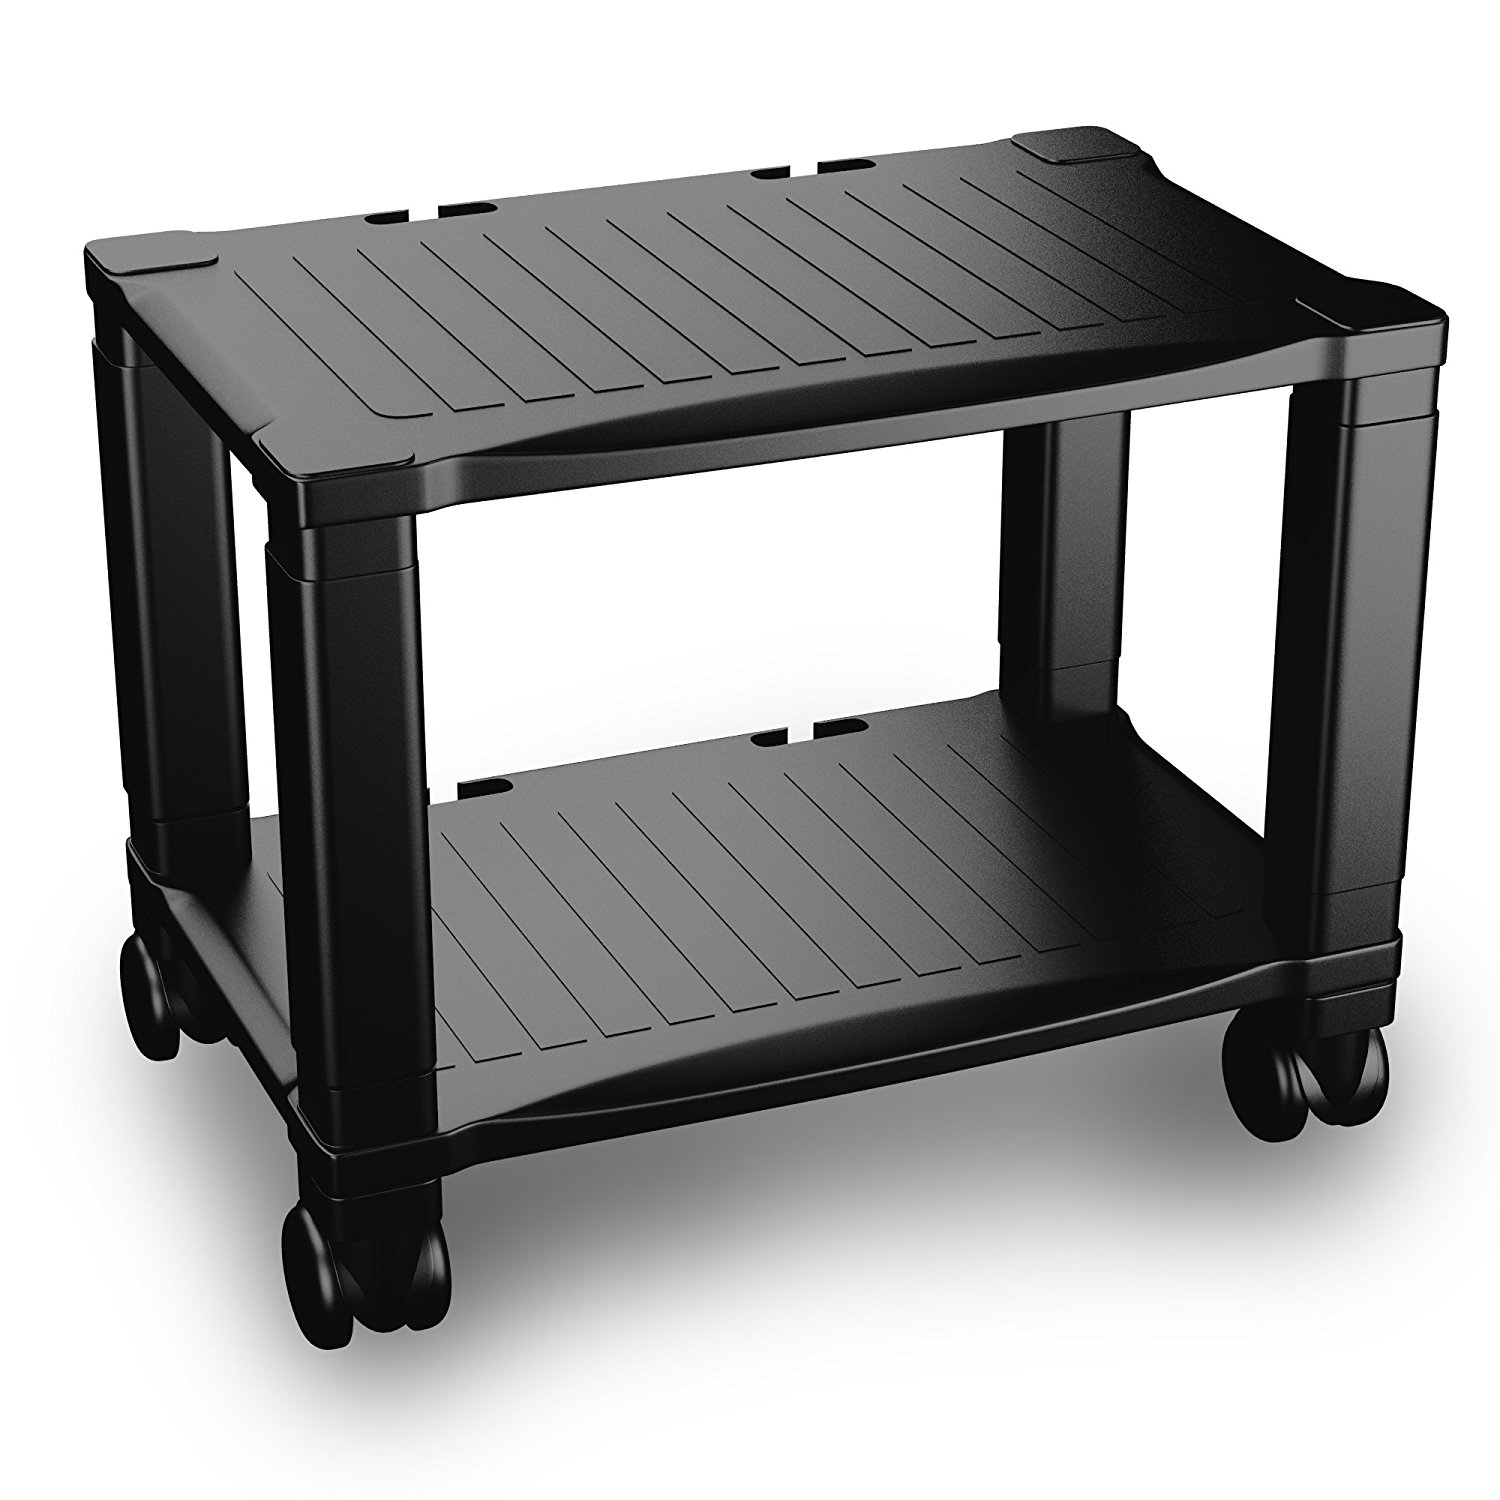 Printer Stand with Wheels - 2 Tiers Shelf - Small Under the Desk Machine Stand Cart -Mini Home Office Rolling Mobile Storage Solution